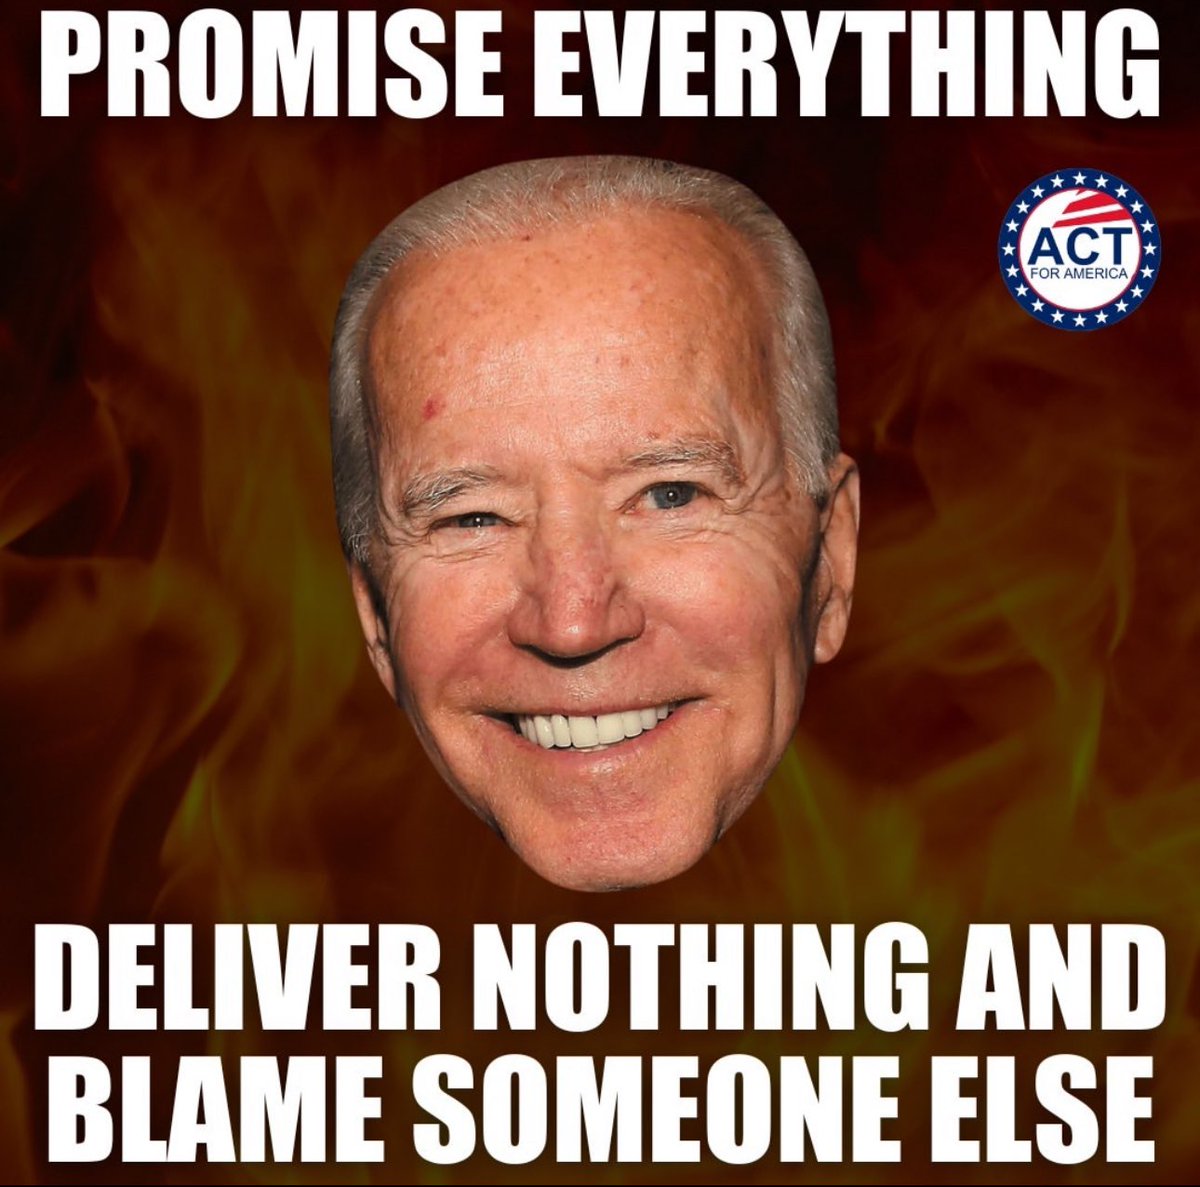 That’s the Biden way. Blame everyone else for his failures and lies.